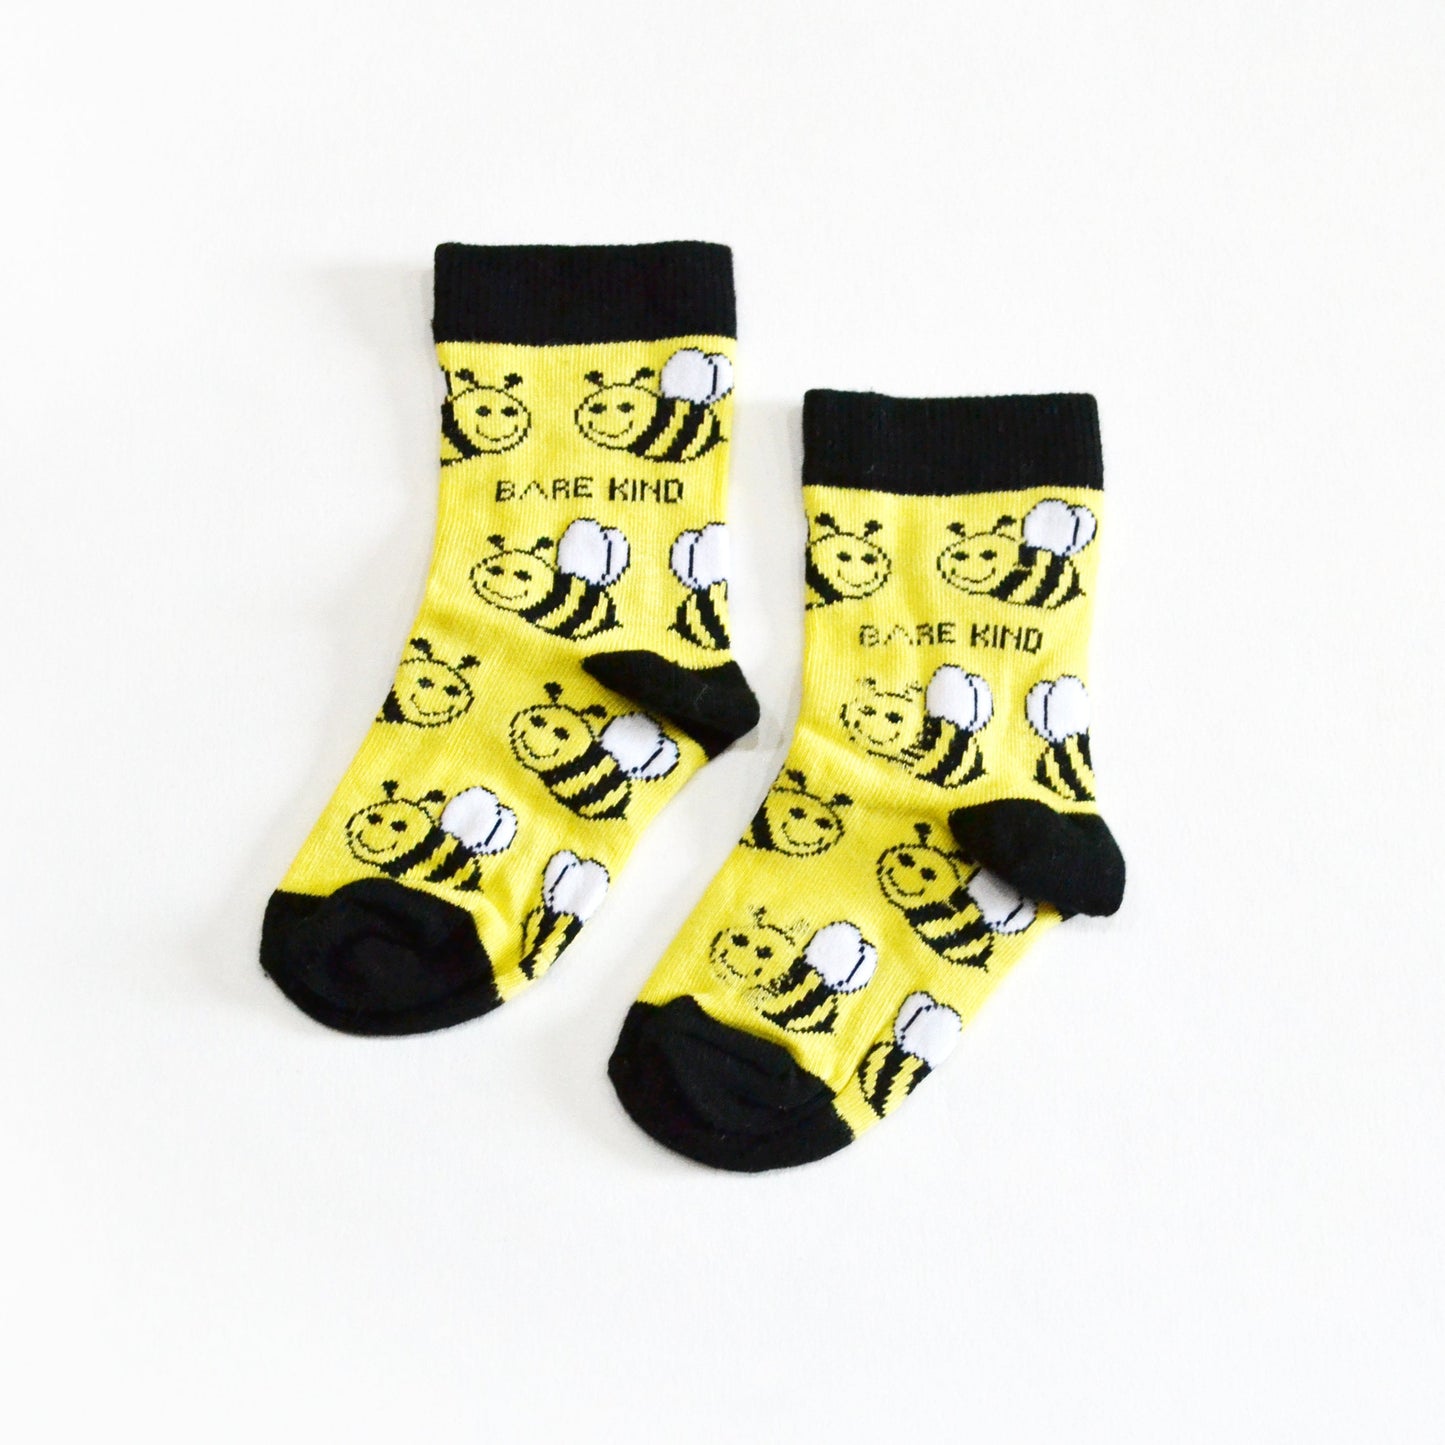 Bare Kind Bamboo Children's Socks - Save the Bees